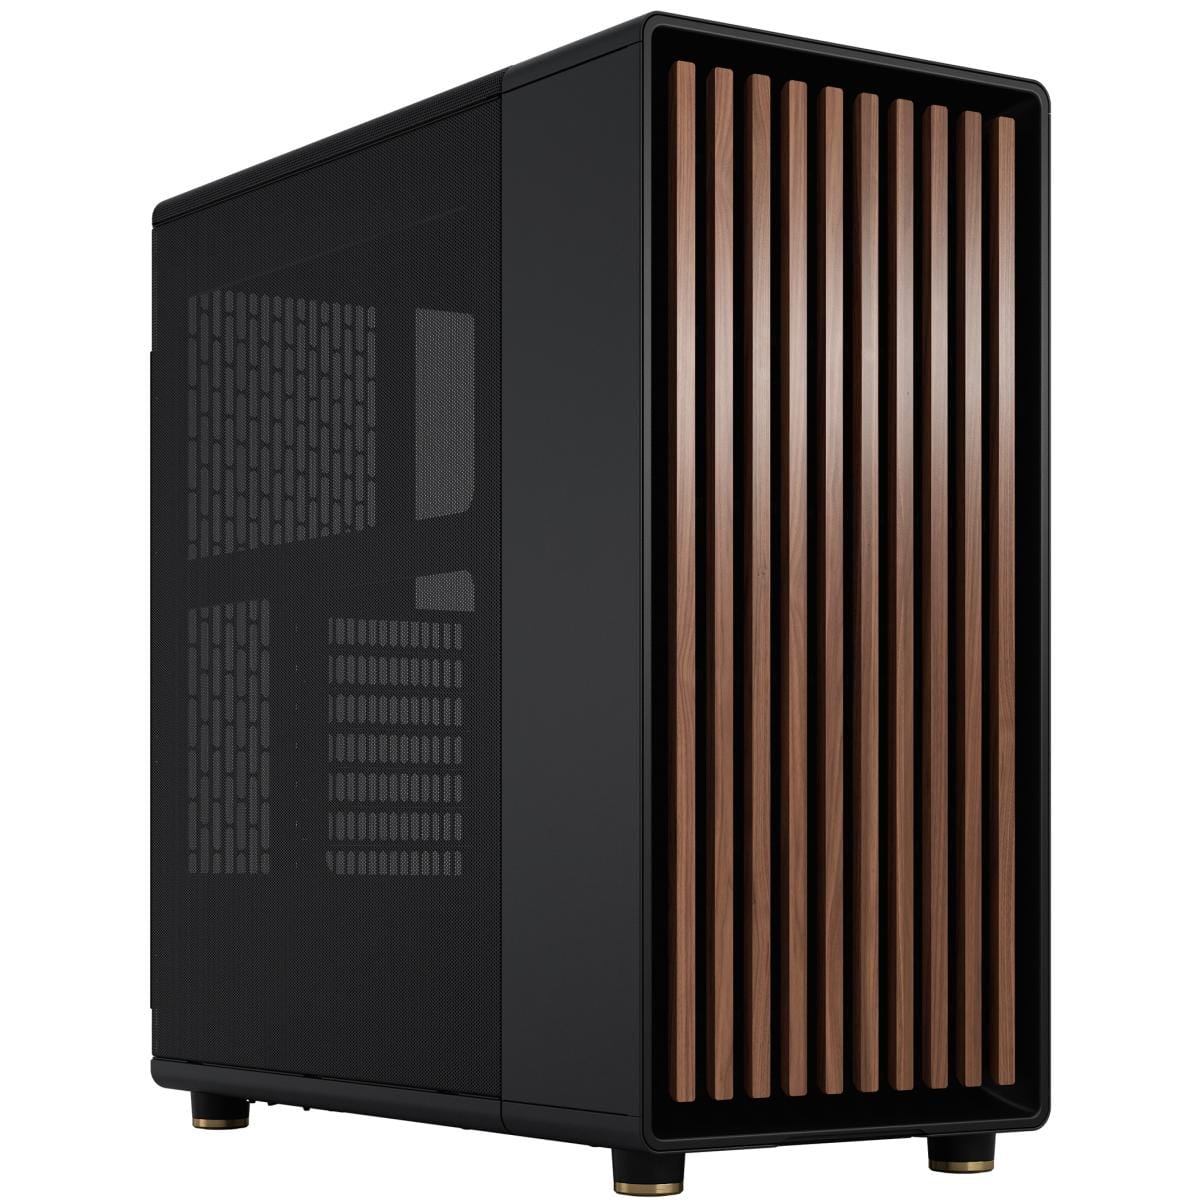 Fractal PC CASE Fractal Design North (Charcoal Black Mesh Ventilated Side) Mid-Tower Elegance Front Wood Gaming Case w/ Type-C & (Front) 2 x 140 mm PWM Fans